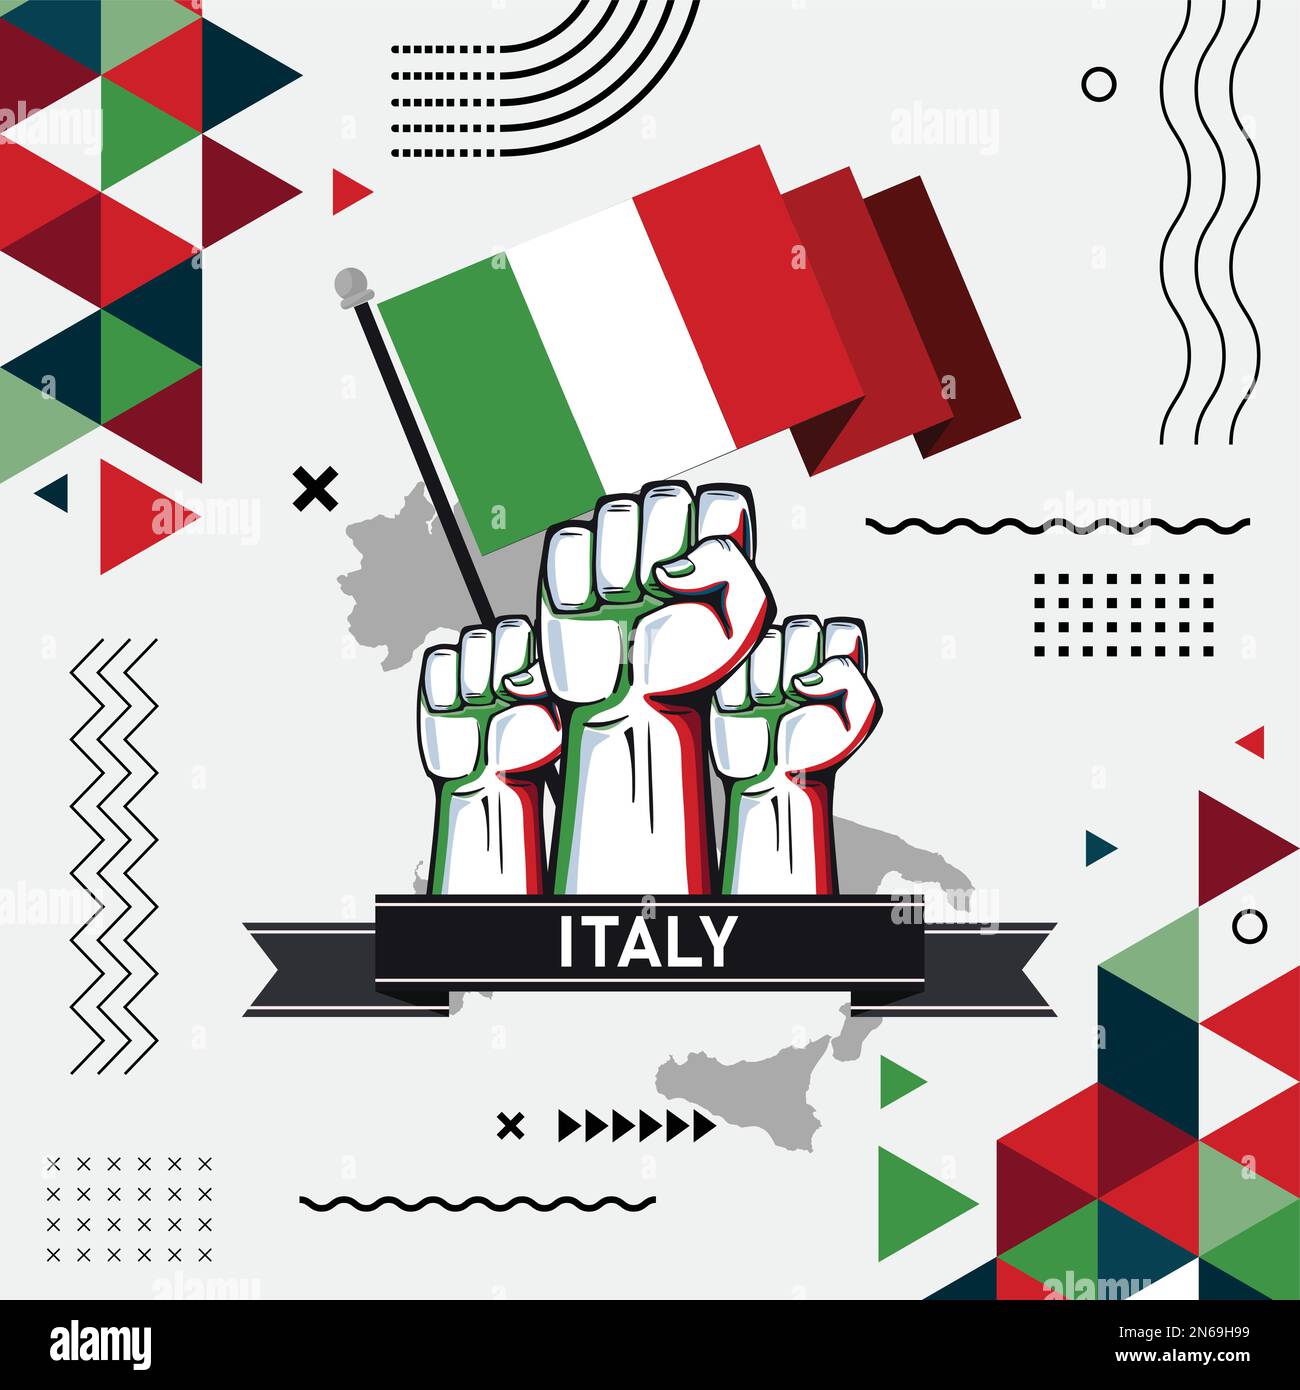 Italia national day banner design. Italian flag and map theme with raised fists. Abstract geometric retro shapes of red and green color. Italy Vector. Stock Vector